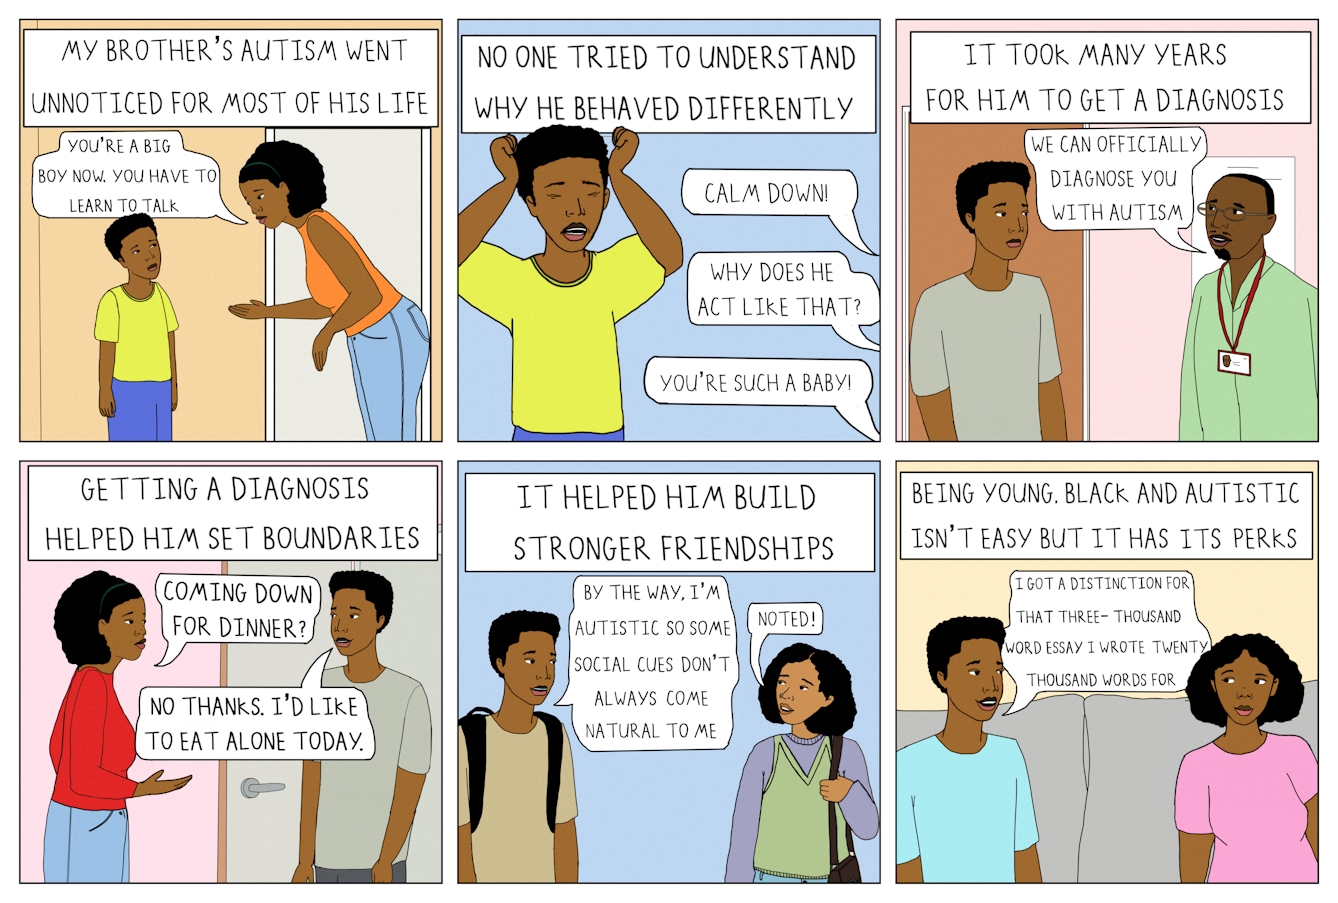 Six panel colour comic strip in a grid of 3 panels wide by 2 panels high.

The first panel shows a young boy and his mother. He is Black and wearing  a yellow t-shirt. A white caption box above them reads ‘My brother’s autism went unnoticed for most of his life’. The mother is leaning downwards to the boy, with a stern look on her face and her right arm outstretched. The boy is looking up at his mother and appears upset. A speech bubble comes from the mother and reads “You’re a big boy now. You have to learn to talk.” 

The second panel shows the same boy. A white caption box above him reads ‘No one tried to understand why he behaved differently’. His eyes are closed and his palms are clenched, with his arms held up to his head in distress. There are three speech bubbles directed at the boy coming from the right. The first reads ‘Calm down!’. The second reads ‘Why does he act like that?’. The third reads ‘You’re such a baby!’. 

The third panel shows the same boy as a teenager in a doctor’s office. A white caption box above him reads ‘It took many years for him to get a diagnosis’. A male doctor, wearing a lab coat and a lanyard, is speaking to the boy. A speech bubble from the doctor reads “We can officially diagnose you with autism”. 

The fourth panel shows the teenage boy and his mother at home. A white caption box above them reads ‘Getting a diagnosis helped him set boundaries’. The boy’s mother is facing the boy, her right arm slightly outstretched towards him. A speech bubble from her reads ‘Coming down for dinner?’. The boy is stood facing his mother with a calm facial expression. A speech bubble from him reads ‘No thanks. I’d like to eat alone today.” 

The fifth panel shows the same boy wearing a backpack talking to a girl. A white caption box above them reads ‘It helped him build stronger friendships.’ The girl has shoulder length brown curly hair and is carrying a satchel. A speech bubble from the boy reads ‘By the way, I’m autistic so some social cues don’t always come natural to me’. A speech bubble from the girl reads ‘Noted!’

The sixth panel shows the boy and his mother sat next to each other on a sofa. A white caption box above them reads ‘Being young, Black and autistic isn’t easy but it has its perks’. The boy, with a slight smile on his face, is speaking to his mother. A speech bubble from him reads ‘I got a distinction for that three-thousand word essay I wrote twenty thousand words for’. 